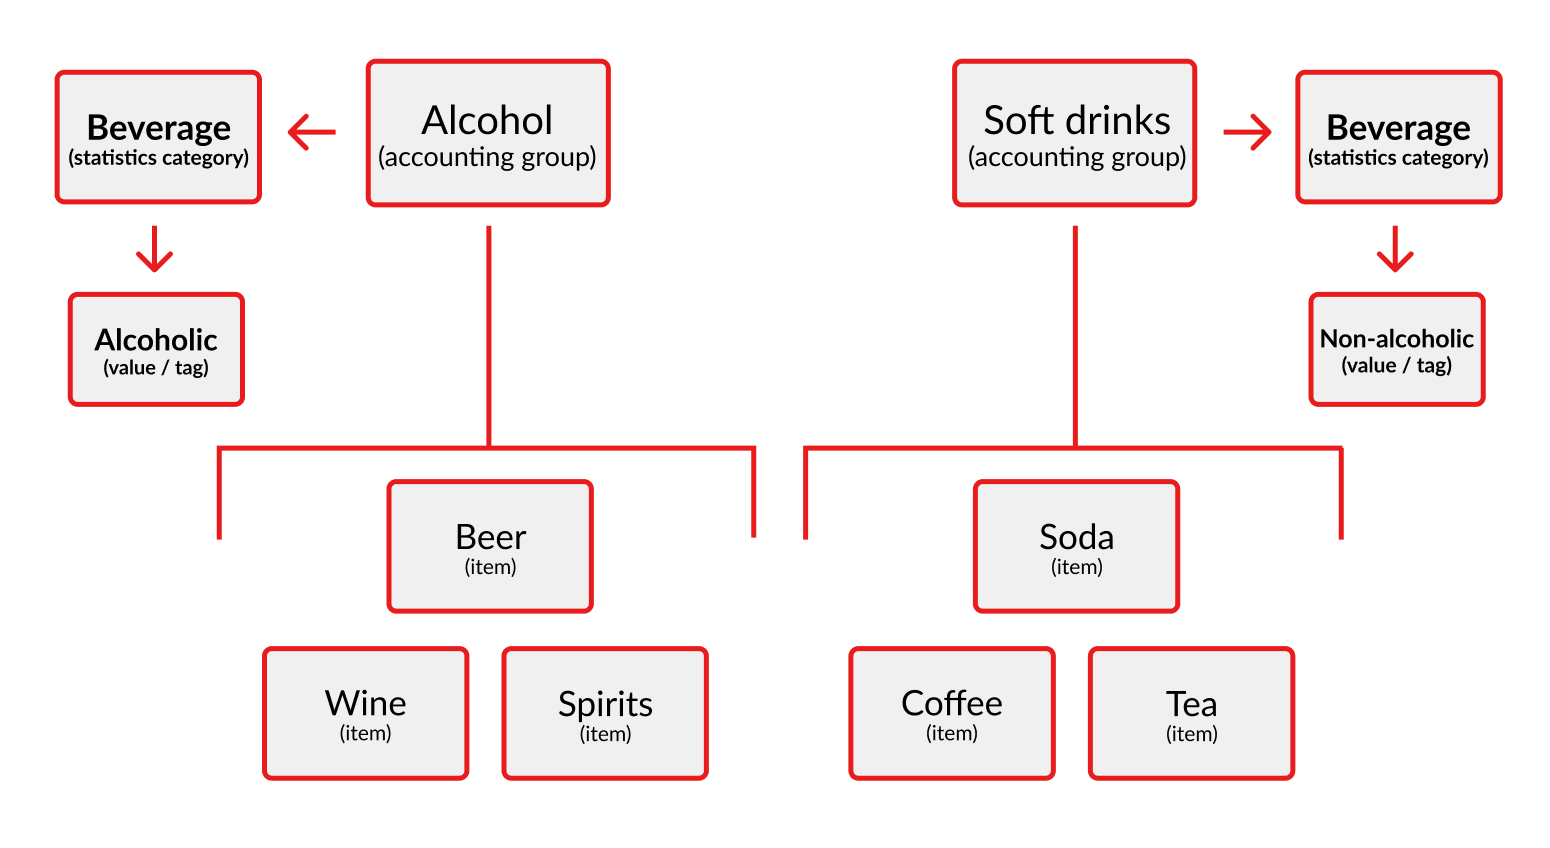 A diagram illustrating the relationship between accounting groups, statistics categories, values / tags, and items.